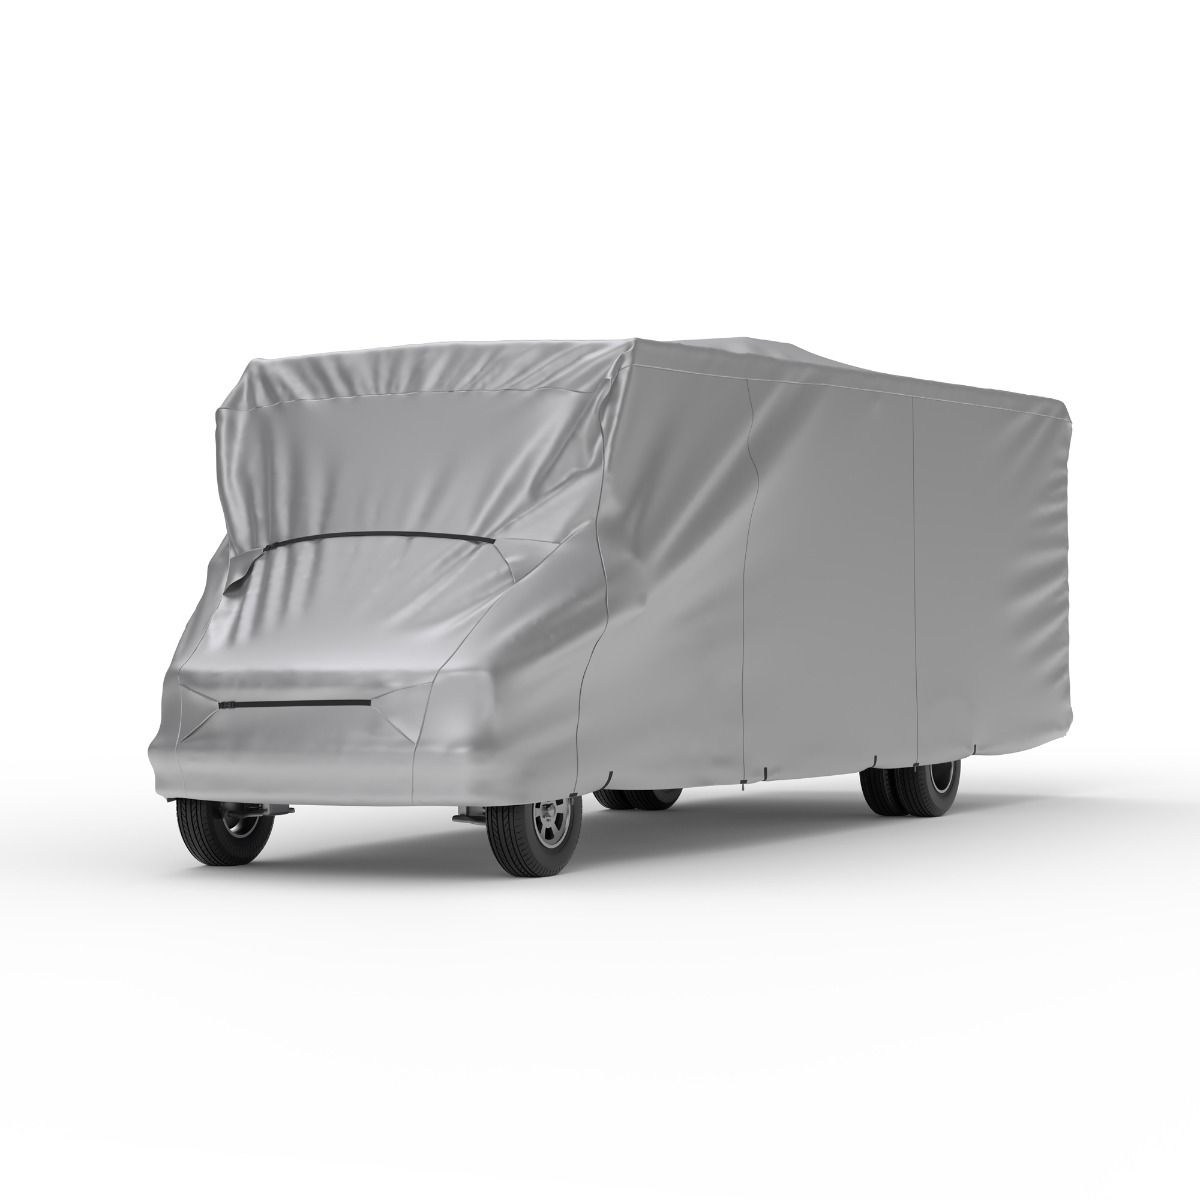 Platinum Shield Class C RV Cover (Fits 26' to 30' Long)